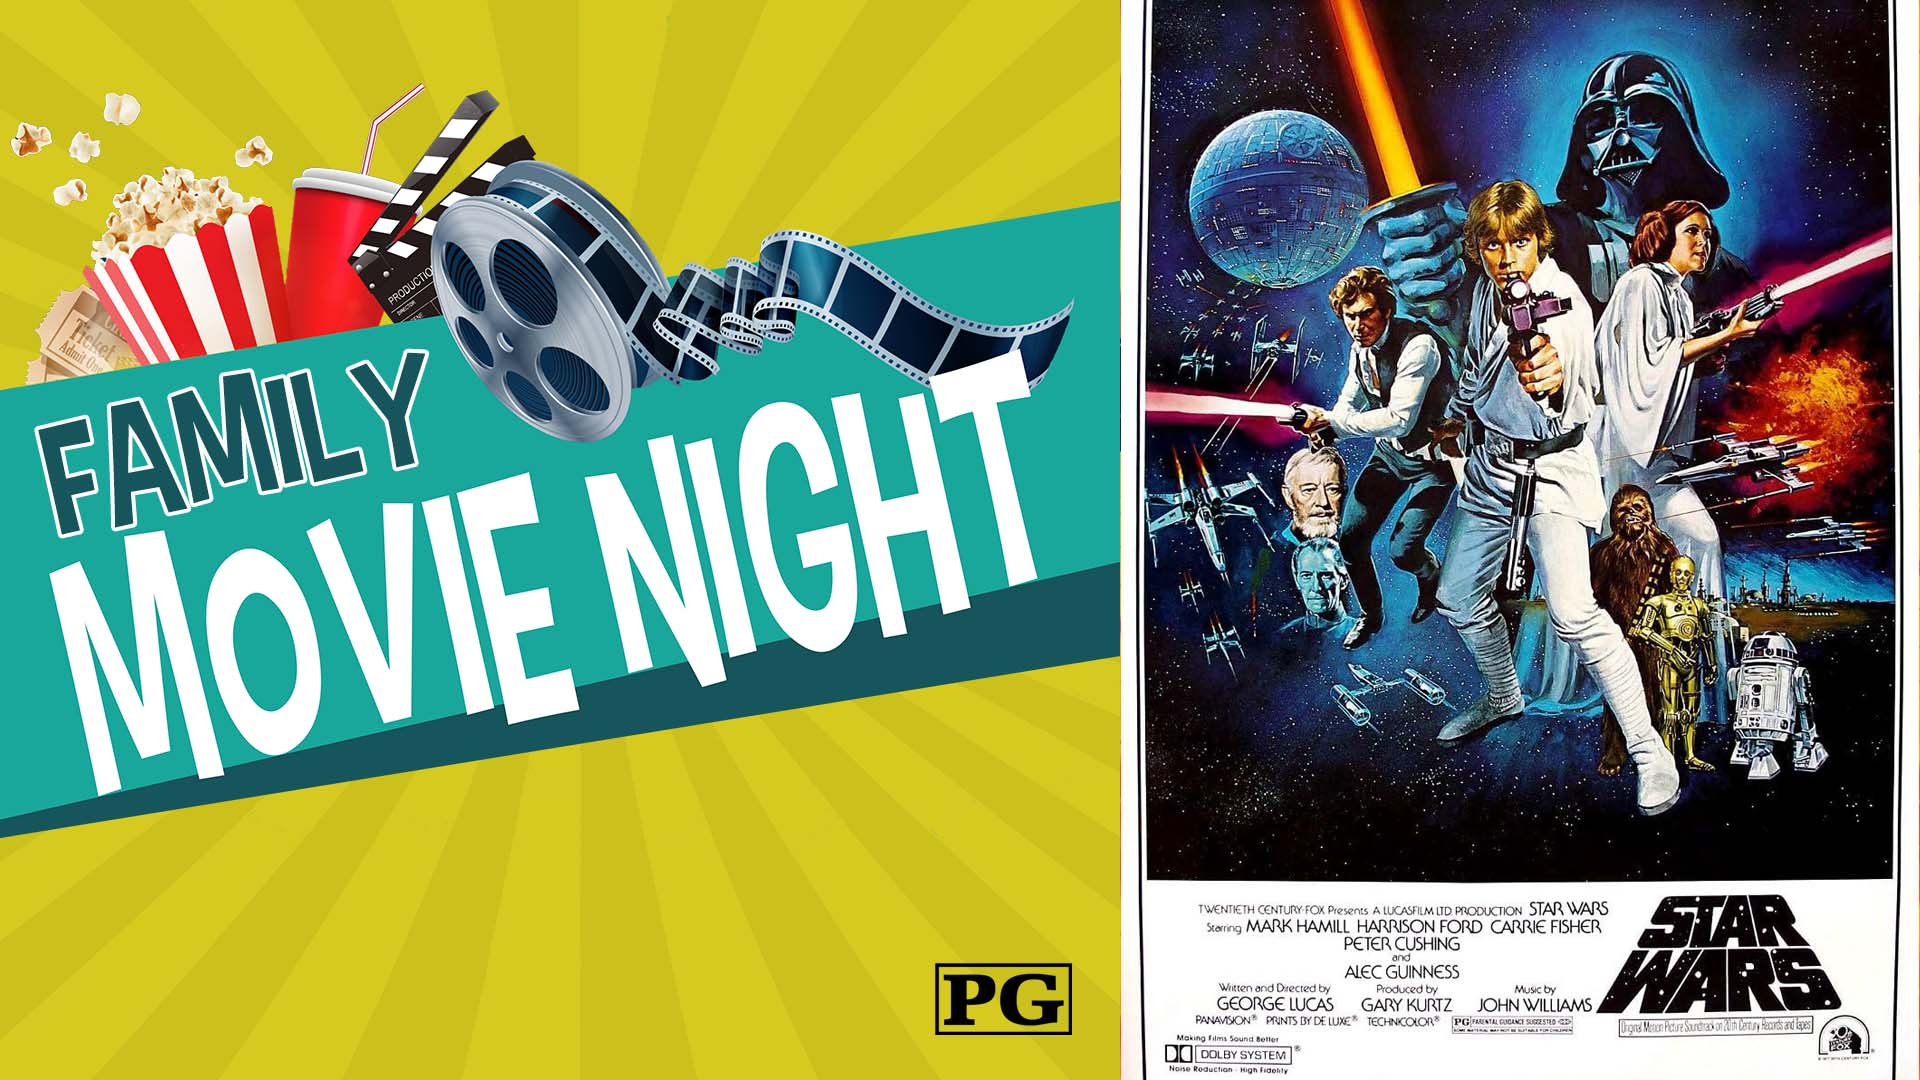 Image reads "Family Movie Night" against a dark yellow sunburst background. A bucket of popcorn, a cup, and a movie reel are above the title. On the right side of the image, a movie poster shows people with glowing swords, robots, and other characters in front of an intergalactic scene with spacecraft and an explosion. The bottom of the poster reads "Star Wars" in a 3D black font with various credit listings.